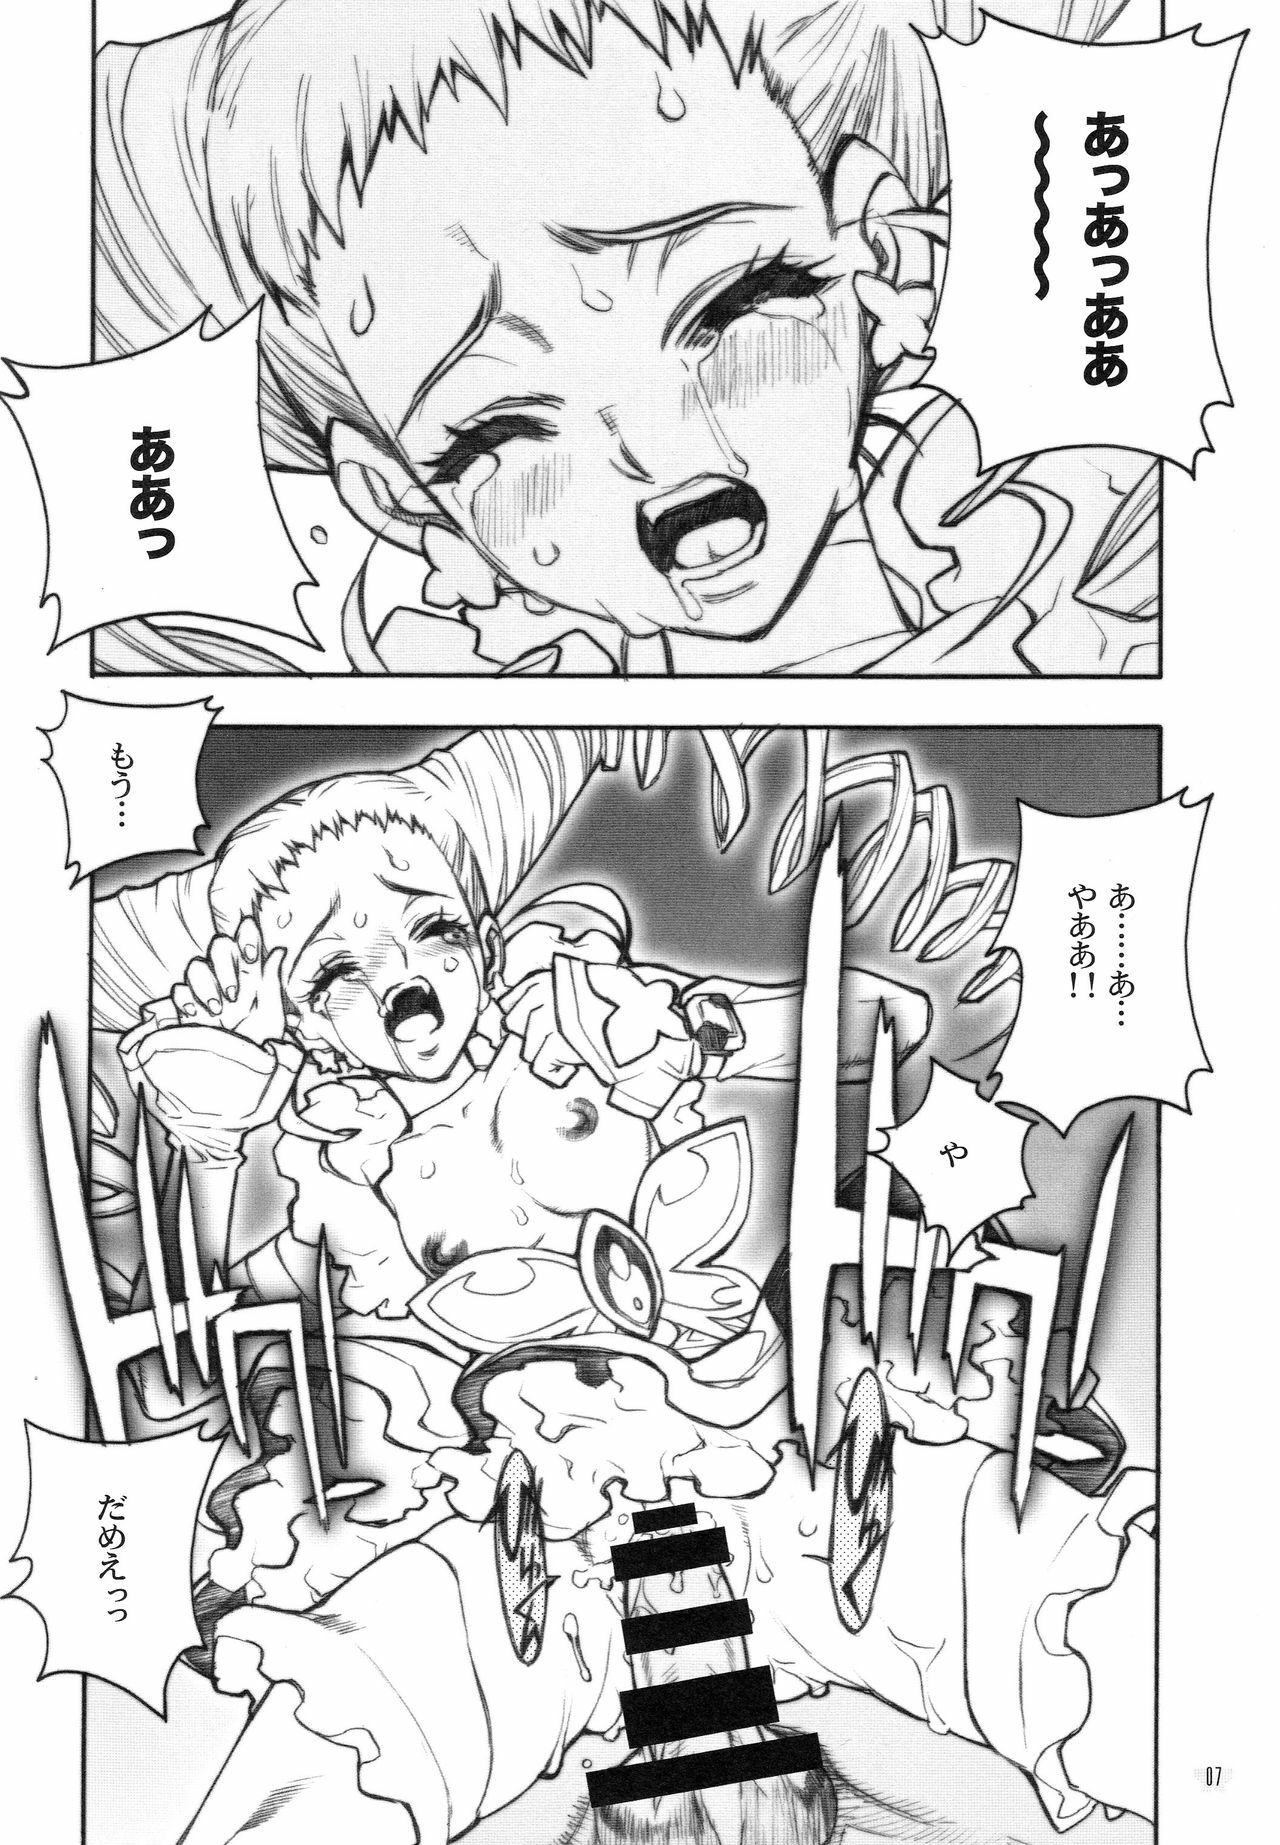 [Piggstar (Nagoya Shachihachi)] Candy Vol.2 taste yellow (Yes! Precure 5) page 4 full